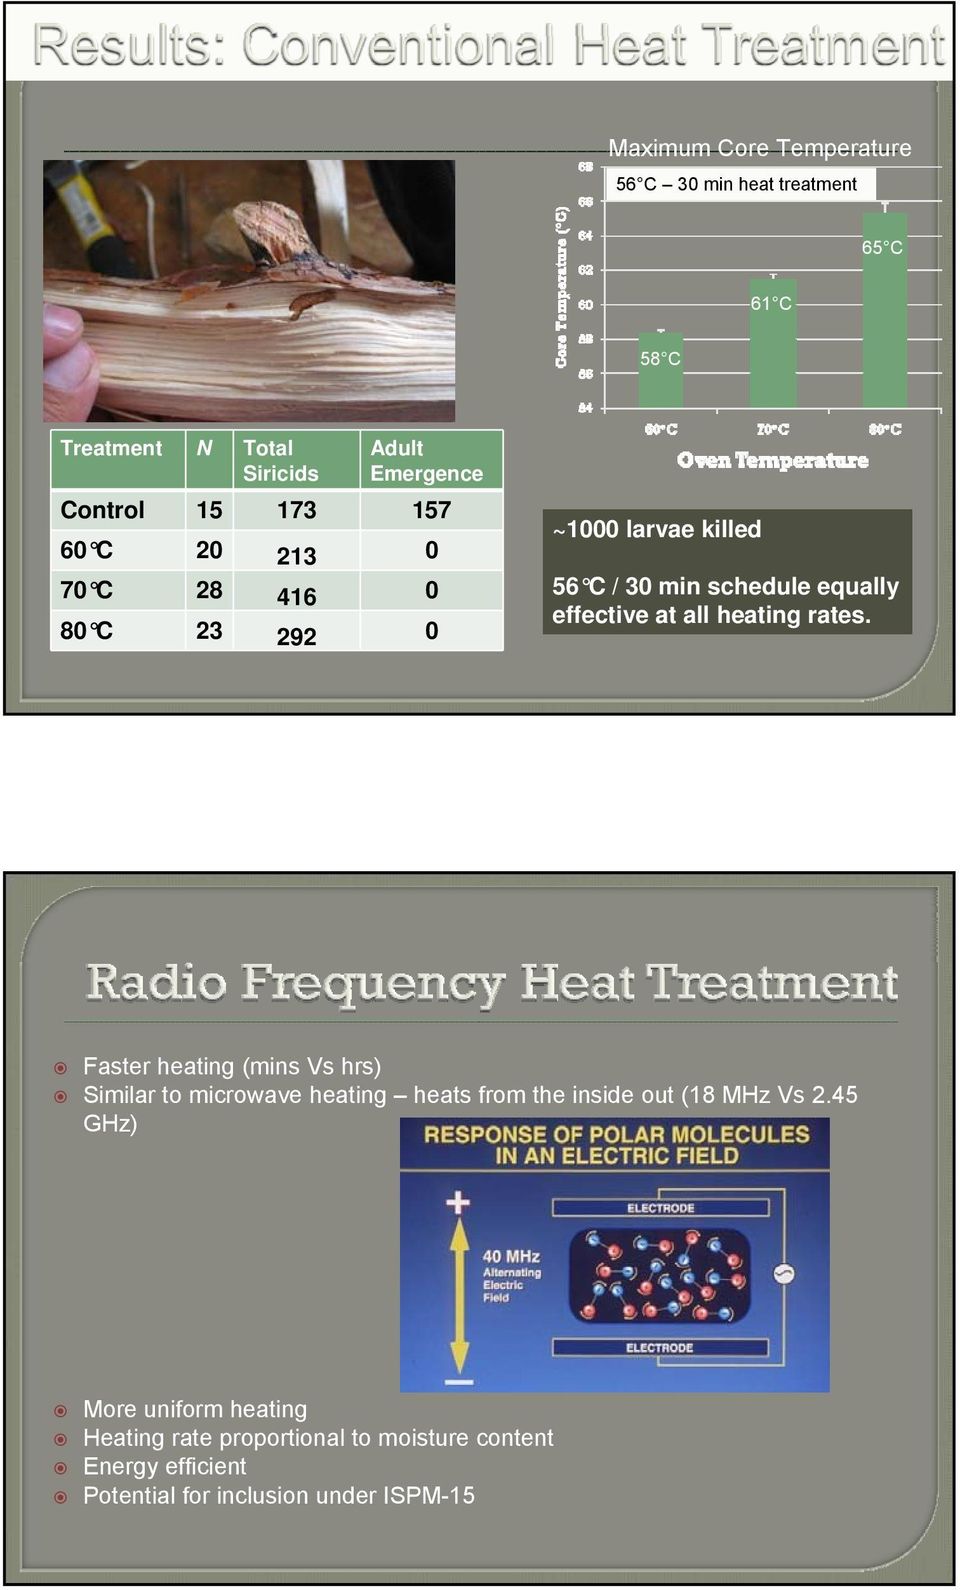 all heating rates. Faster heating (mins Vs hrs) Similar to microwave heating heats from the inside out (18 MHz Vs 2.